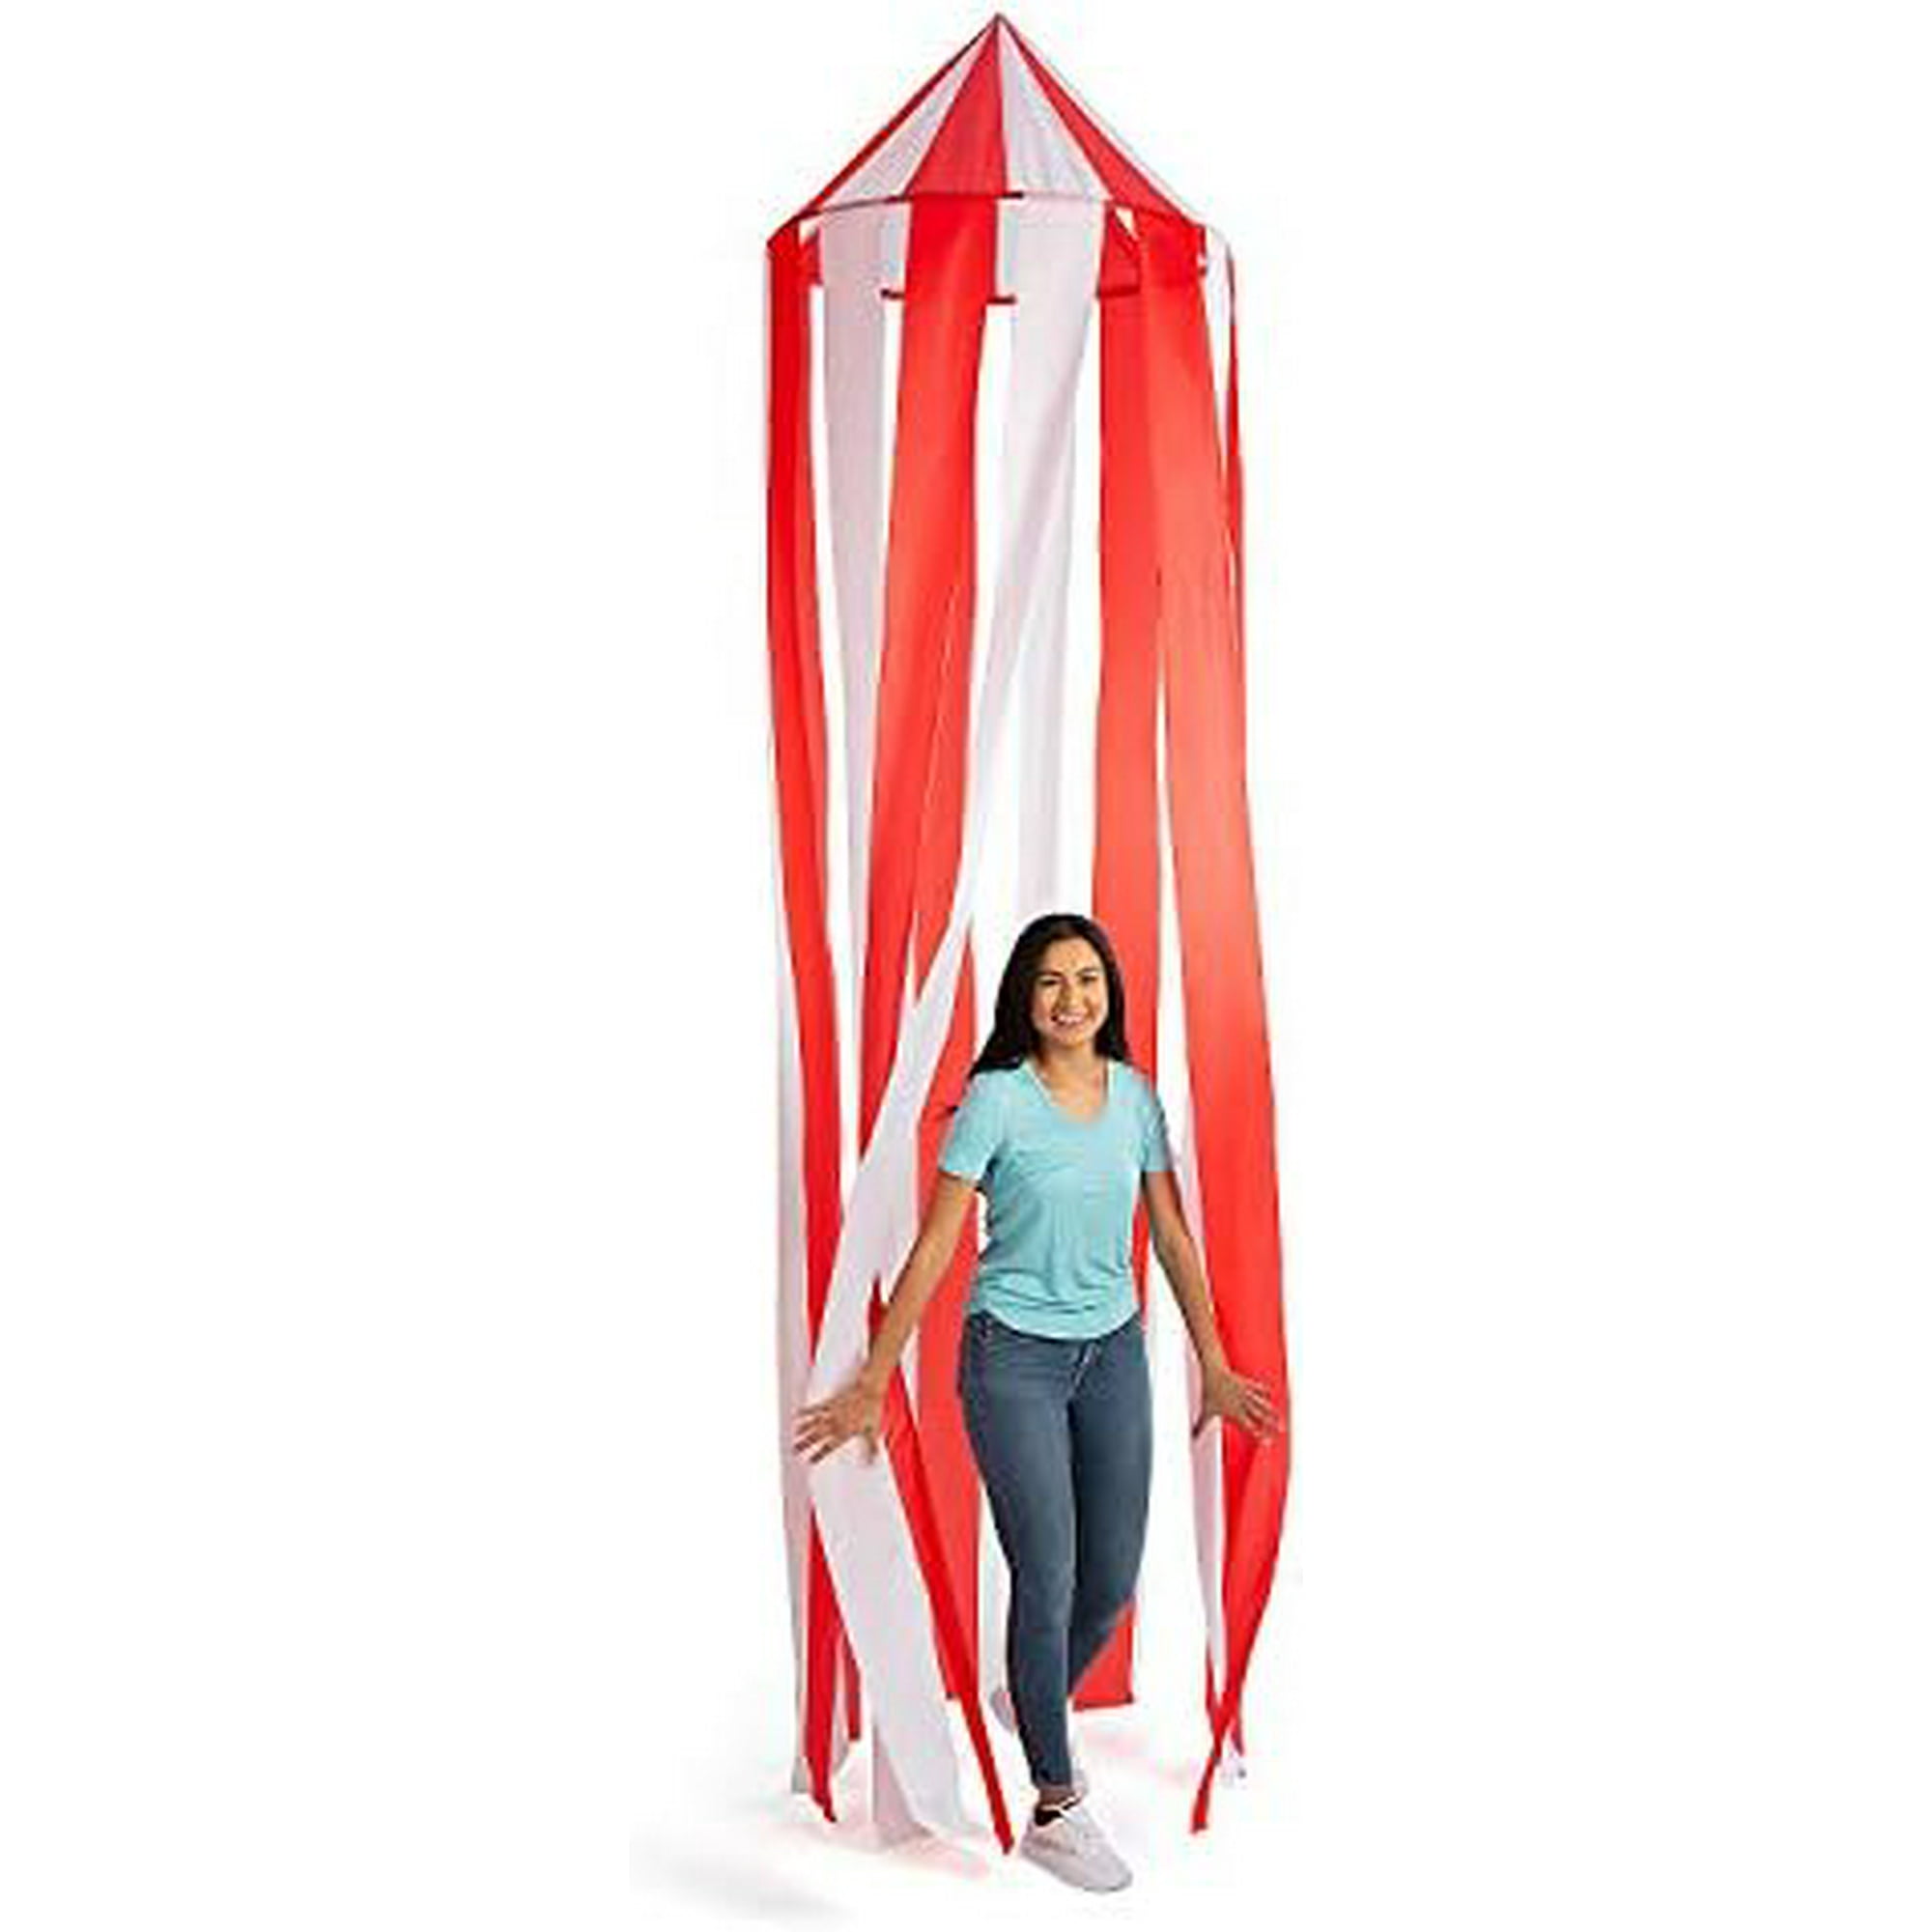 Carnival Tent Hanging Decoration or Reading Nook - 7 feet x 6 feet ...